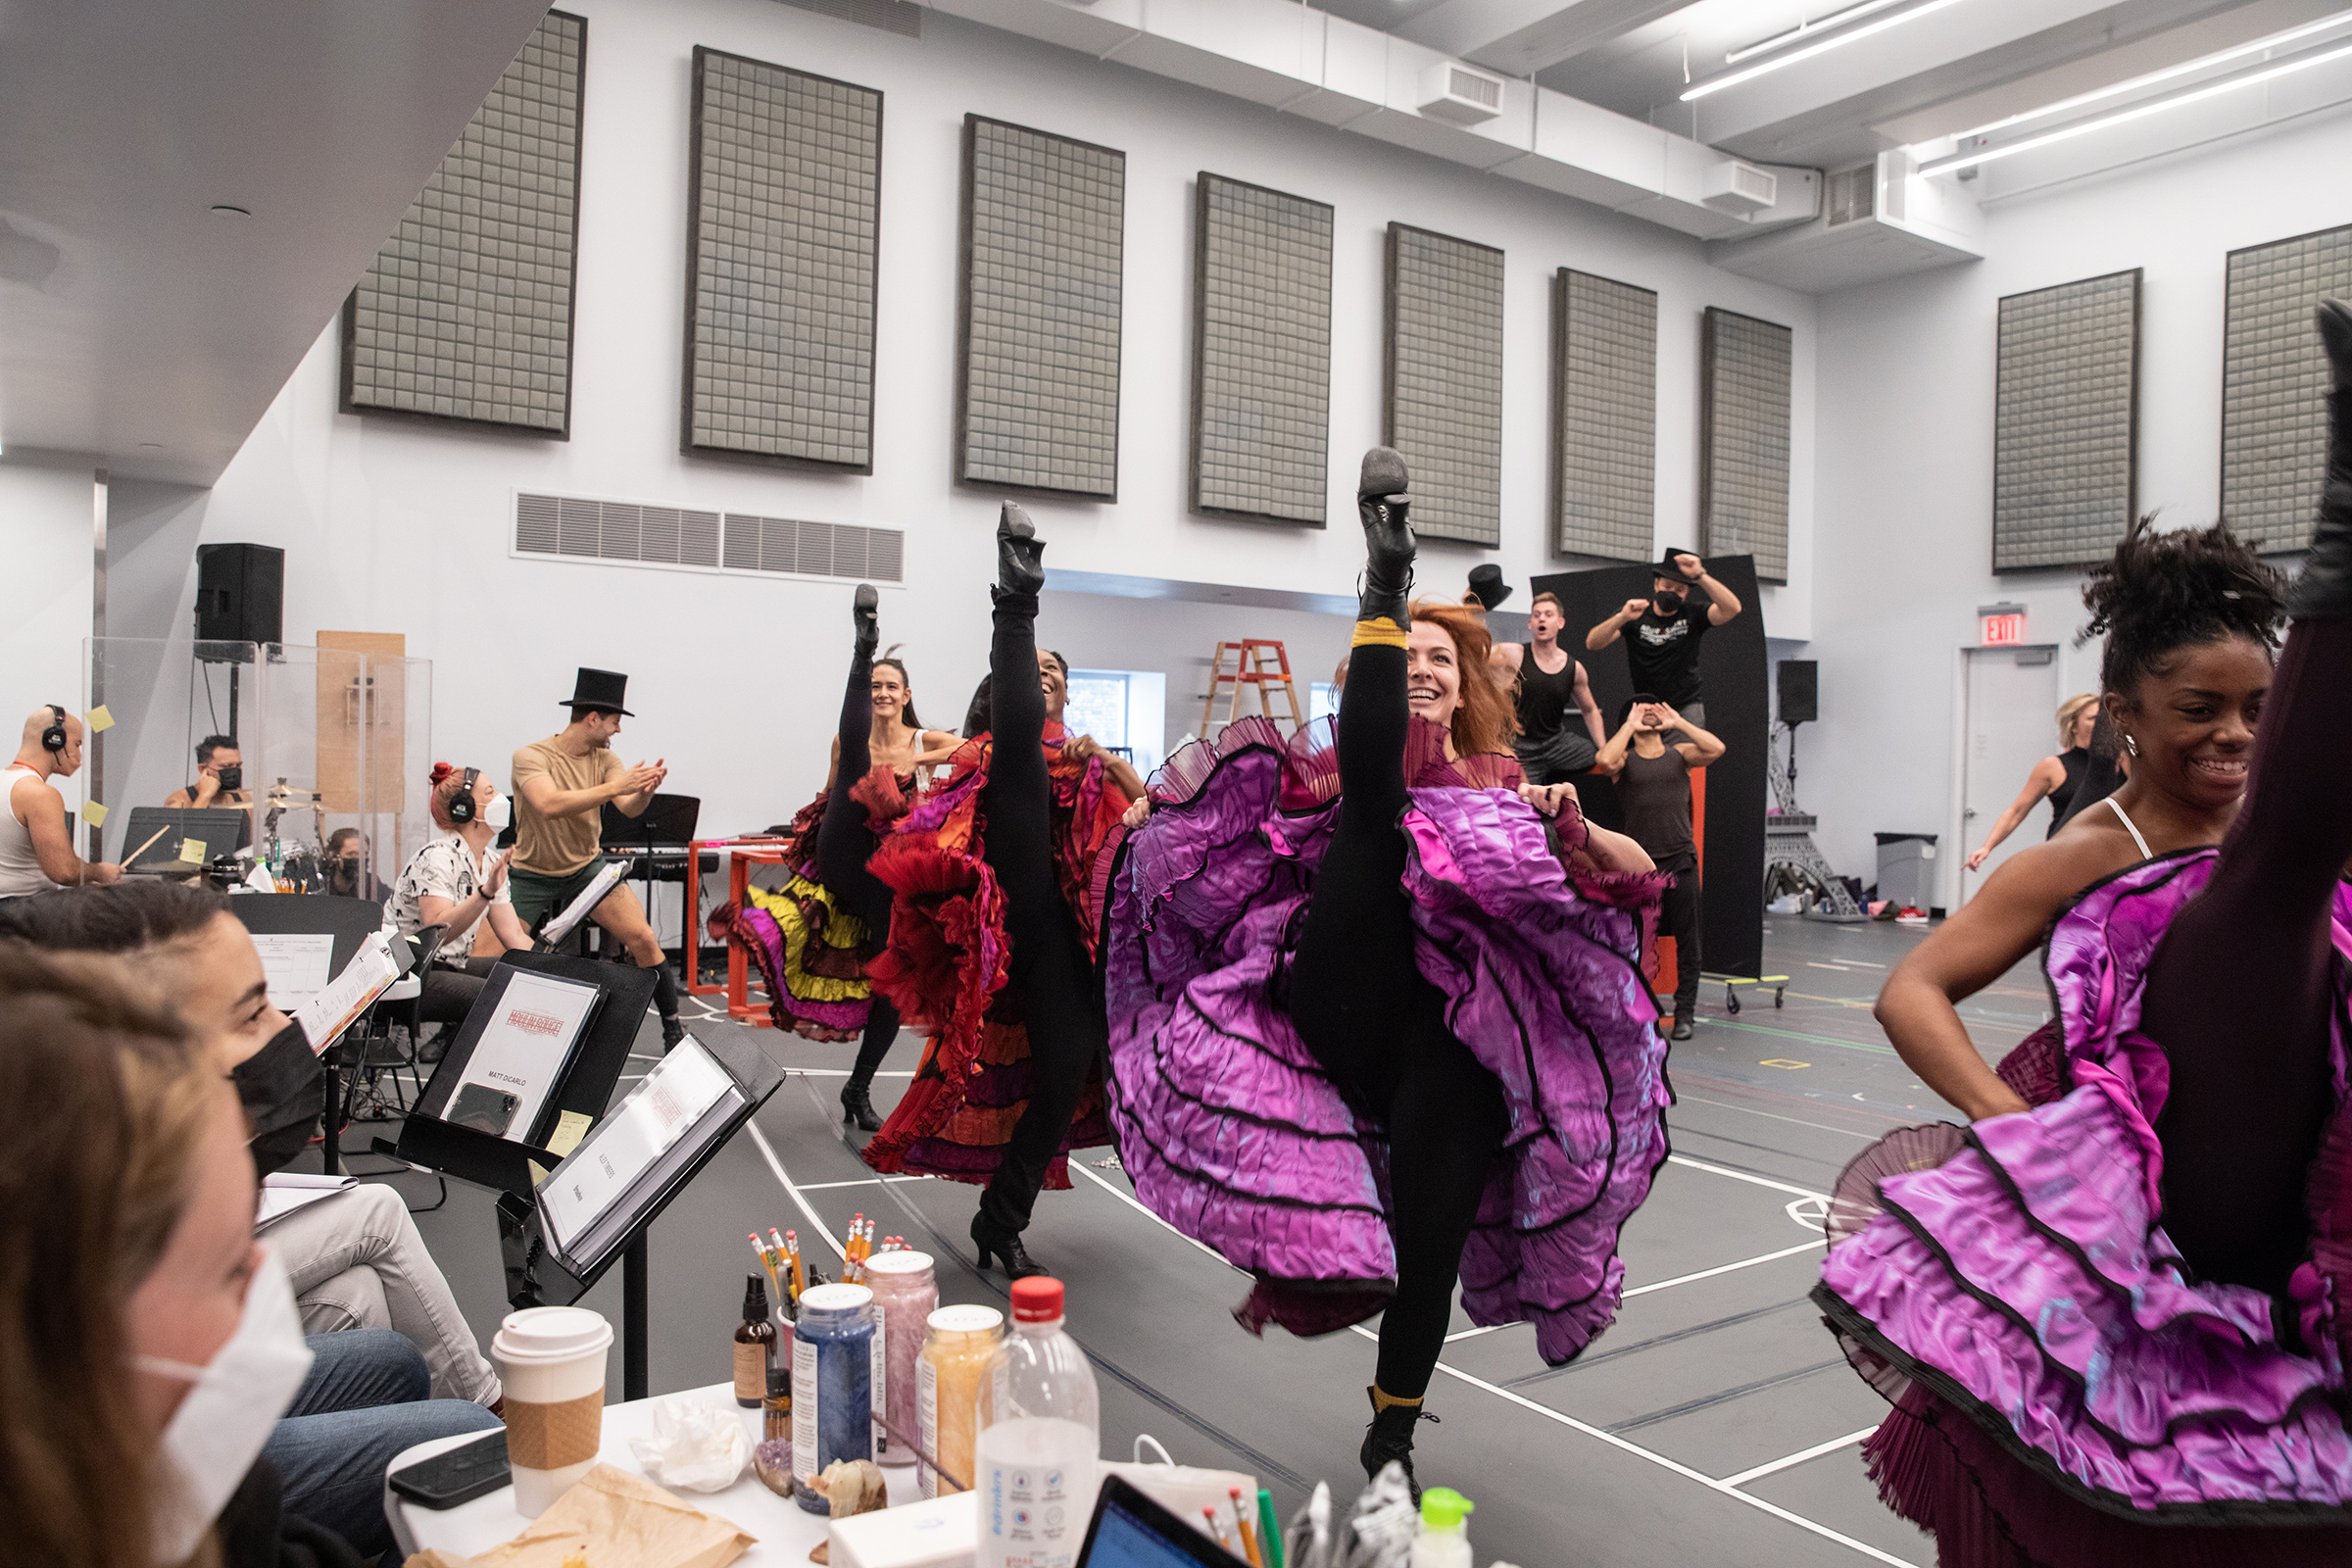 Ensemble members doing the can-can during the <i>Moulin Rouge! The Musical</i> run-through in the studio on Sept. 12, 2021.